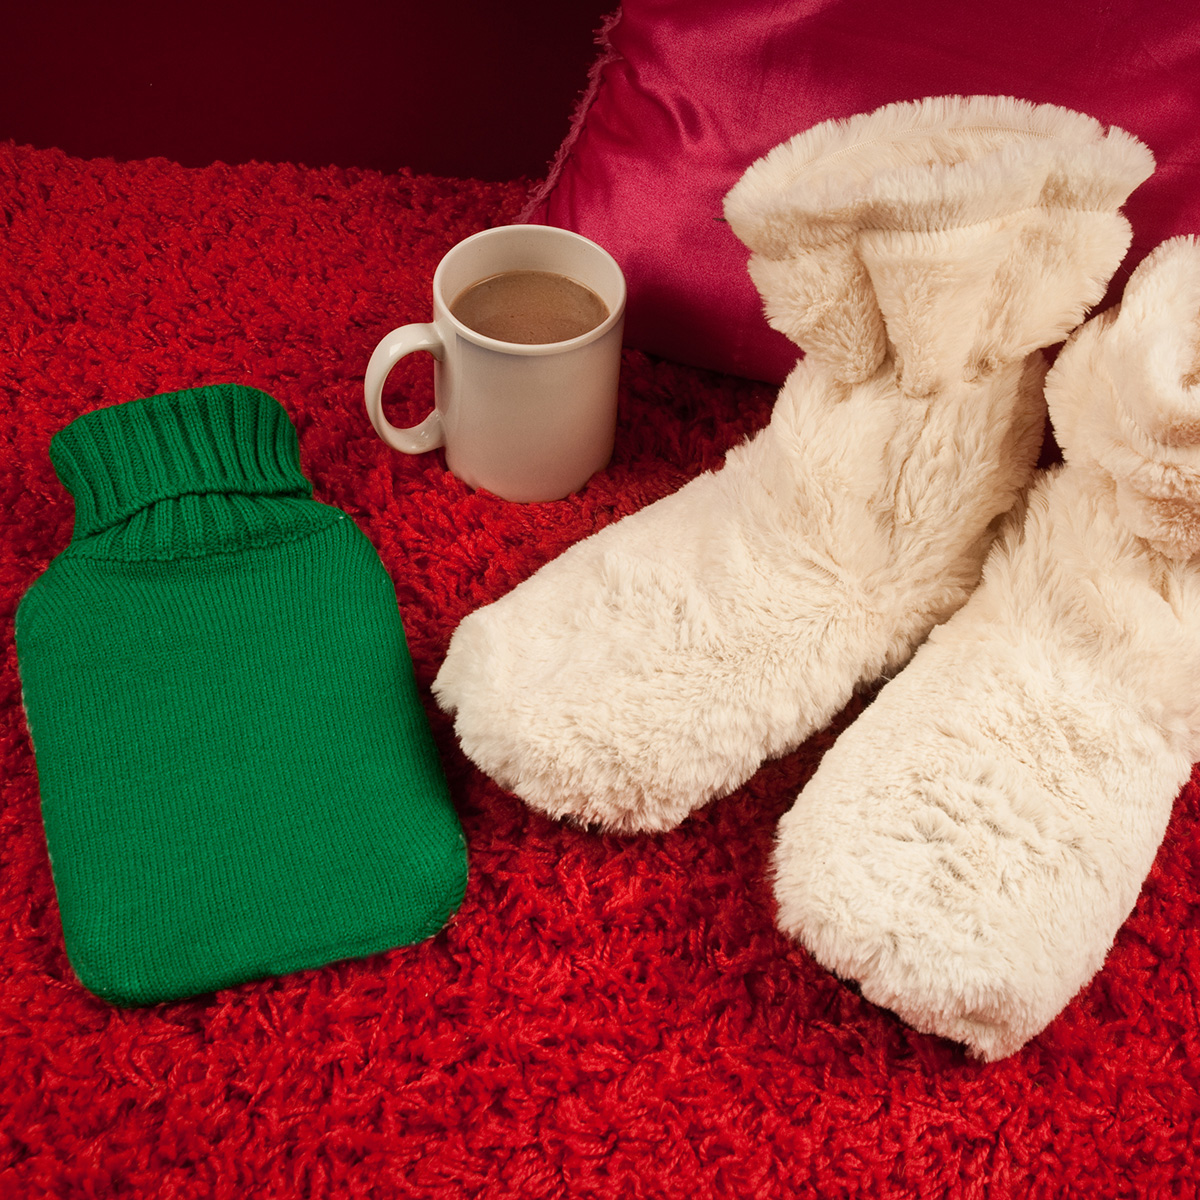 Cozy Boots Cream Microwavable Slipper Boots